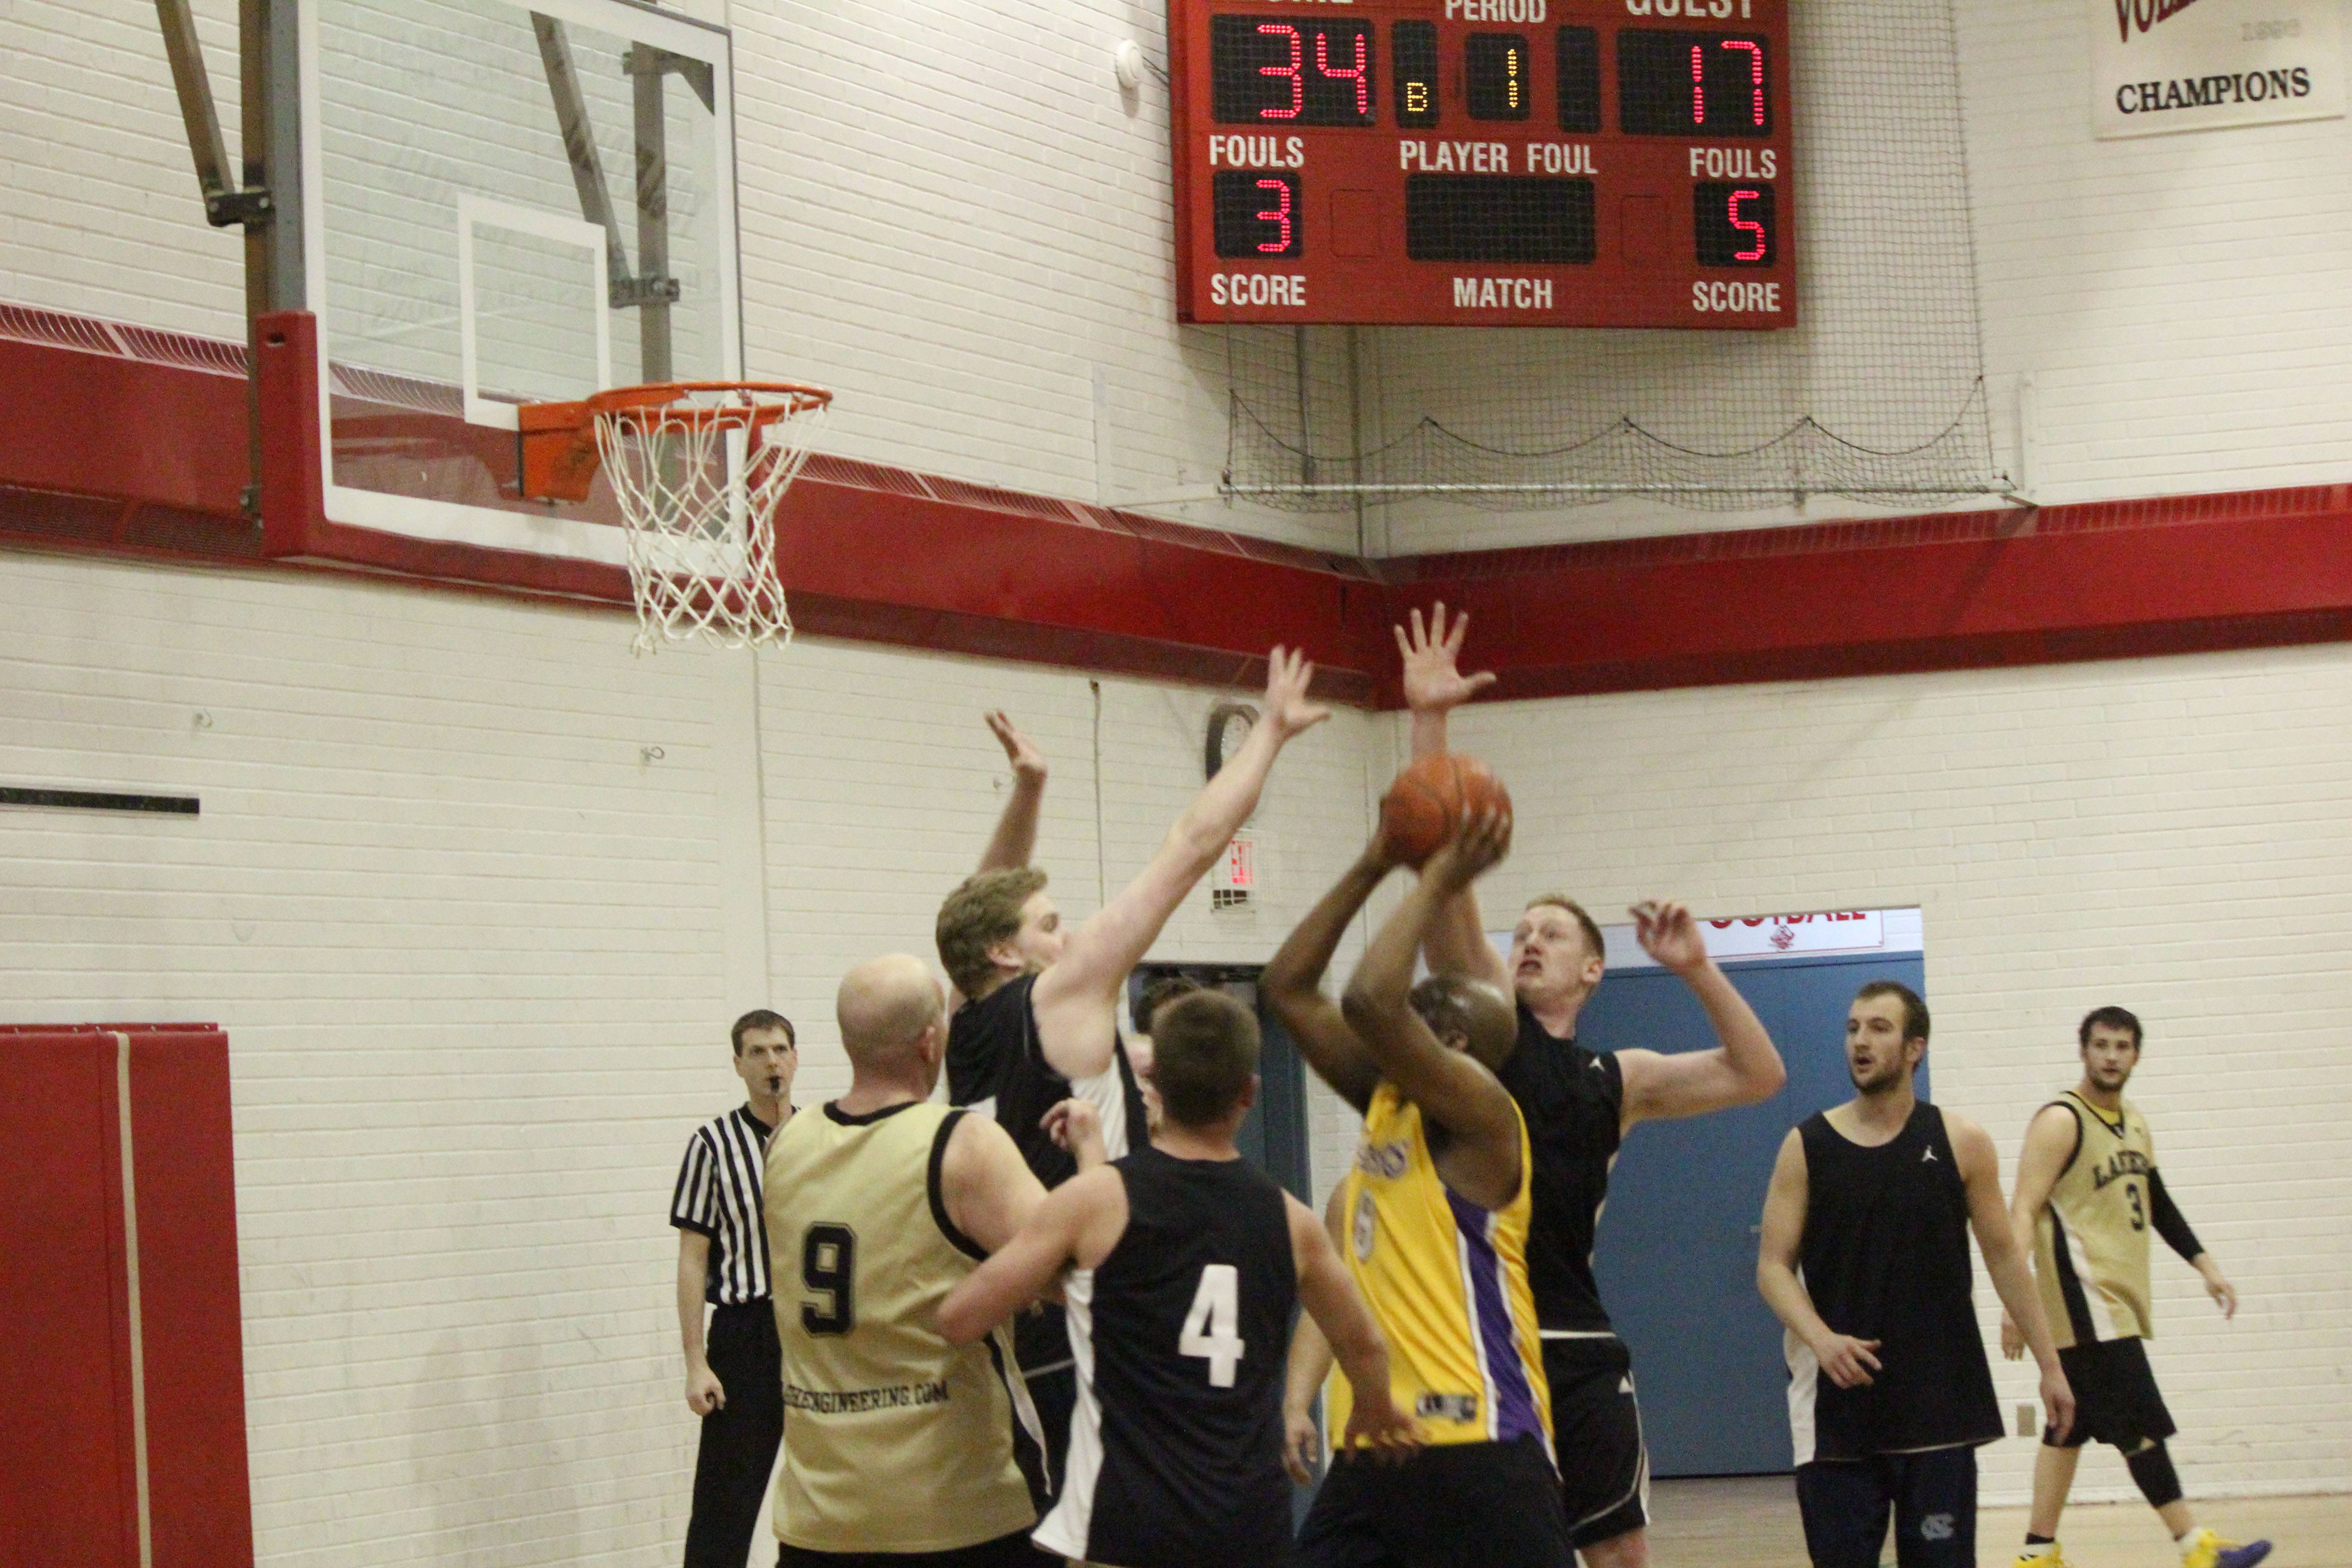 SURE SHOT- The Monstars (in black) face off against the Tagish Lakers (in gold) in the quarter finals at LTCHS on Thursday night.